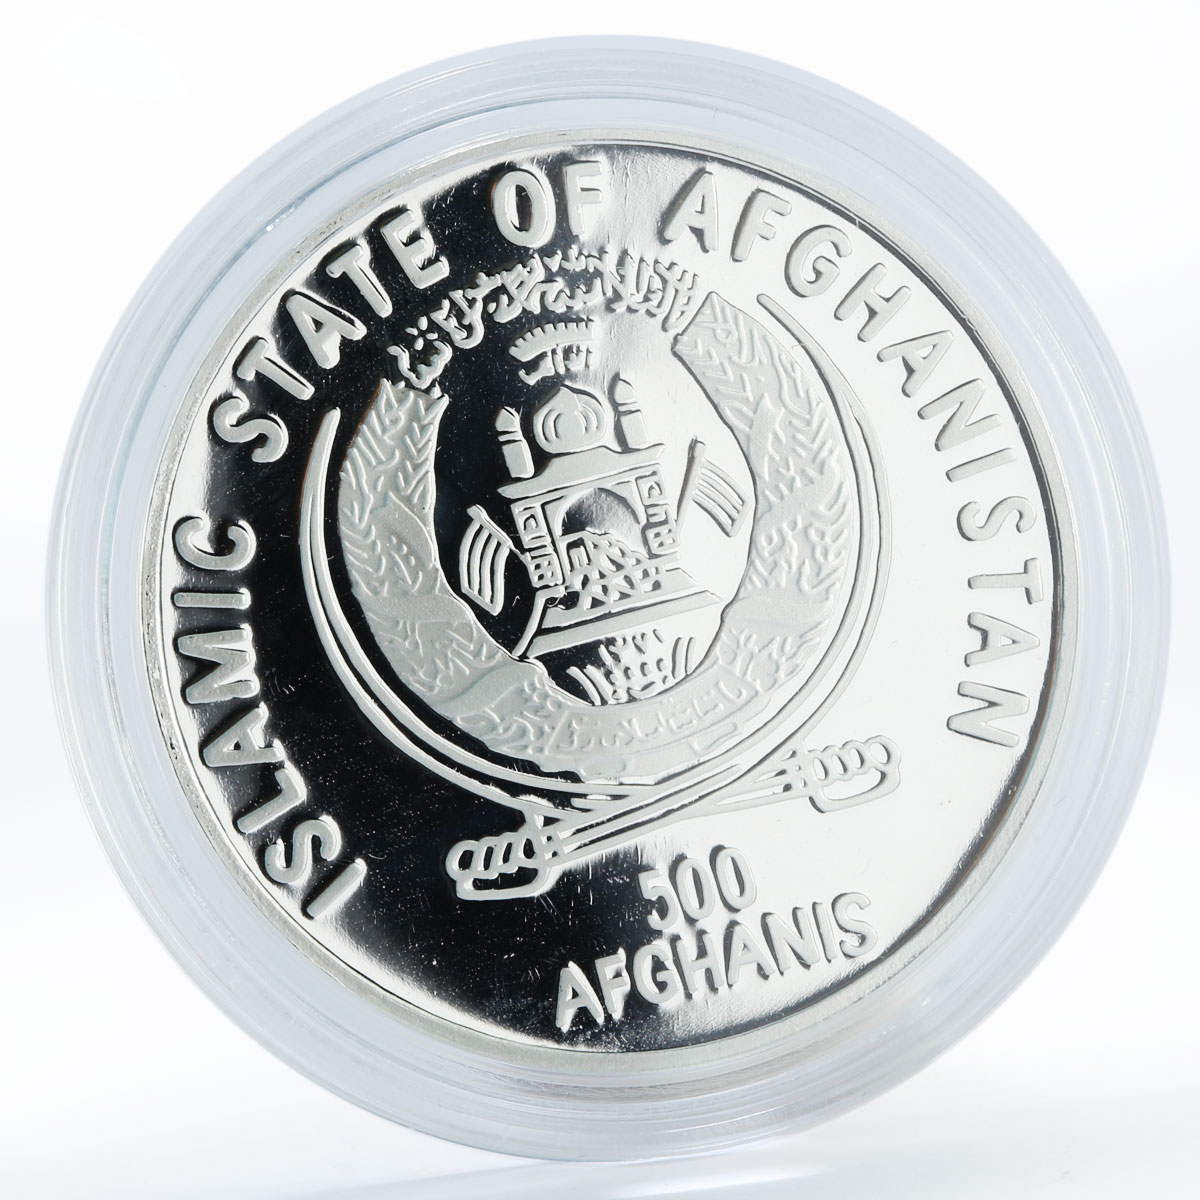 Afghanistan 500 afghanis Snow Leopard proof silver coin 2000